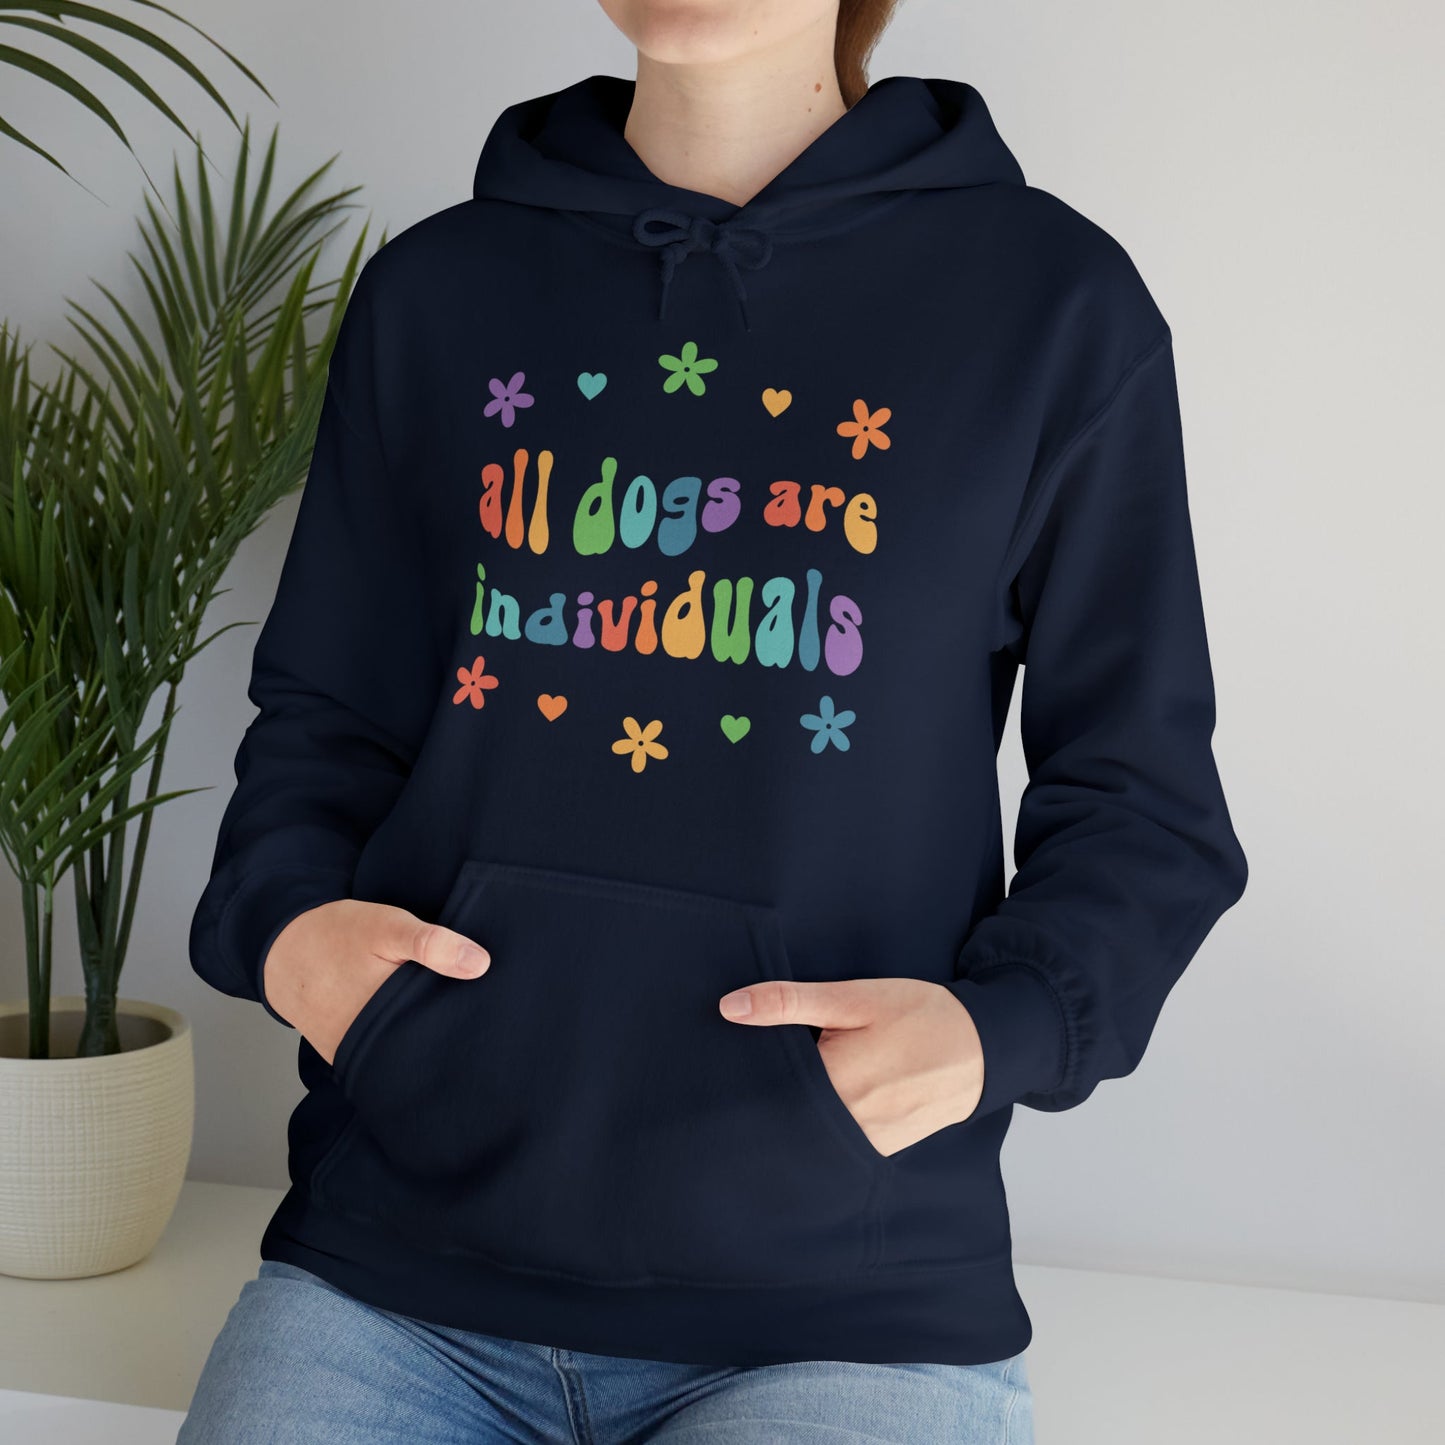 All Dogs are Individuals | Hooded Sweatshirt - Detezi Designs-53906888762041354529